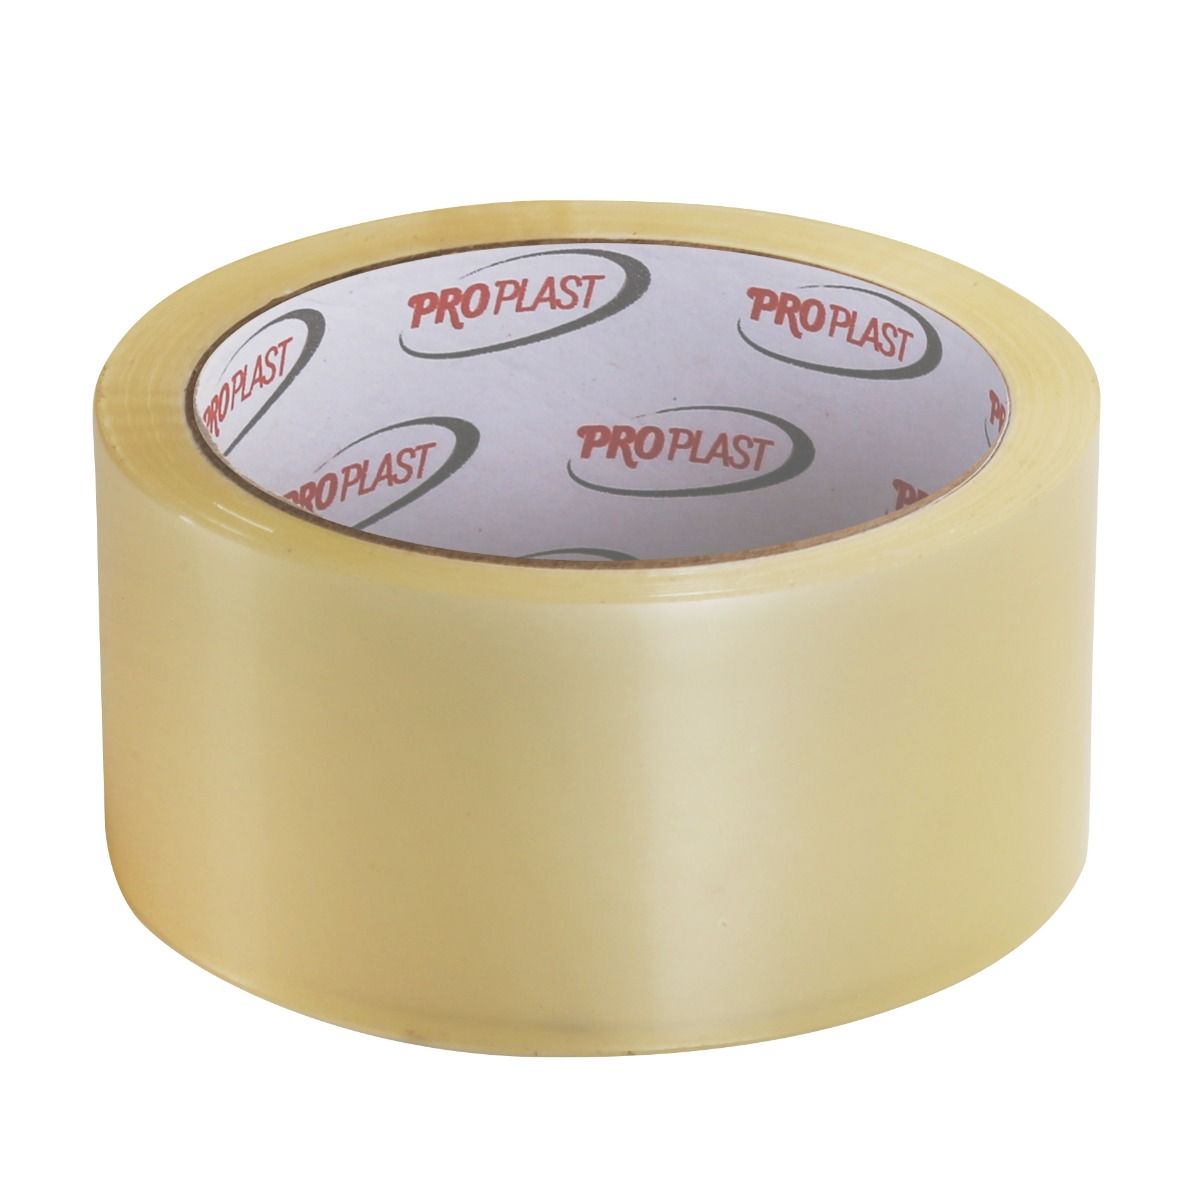 ProPlast Packing Tape (Bulk) - Clear - 2 x 55 yds. - 36 Count